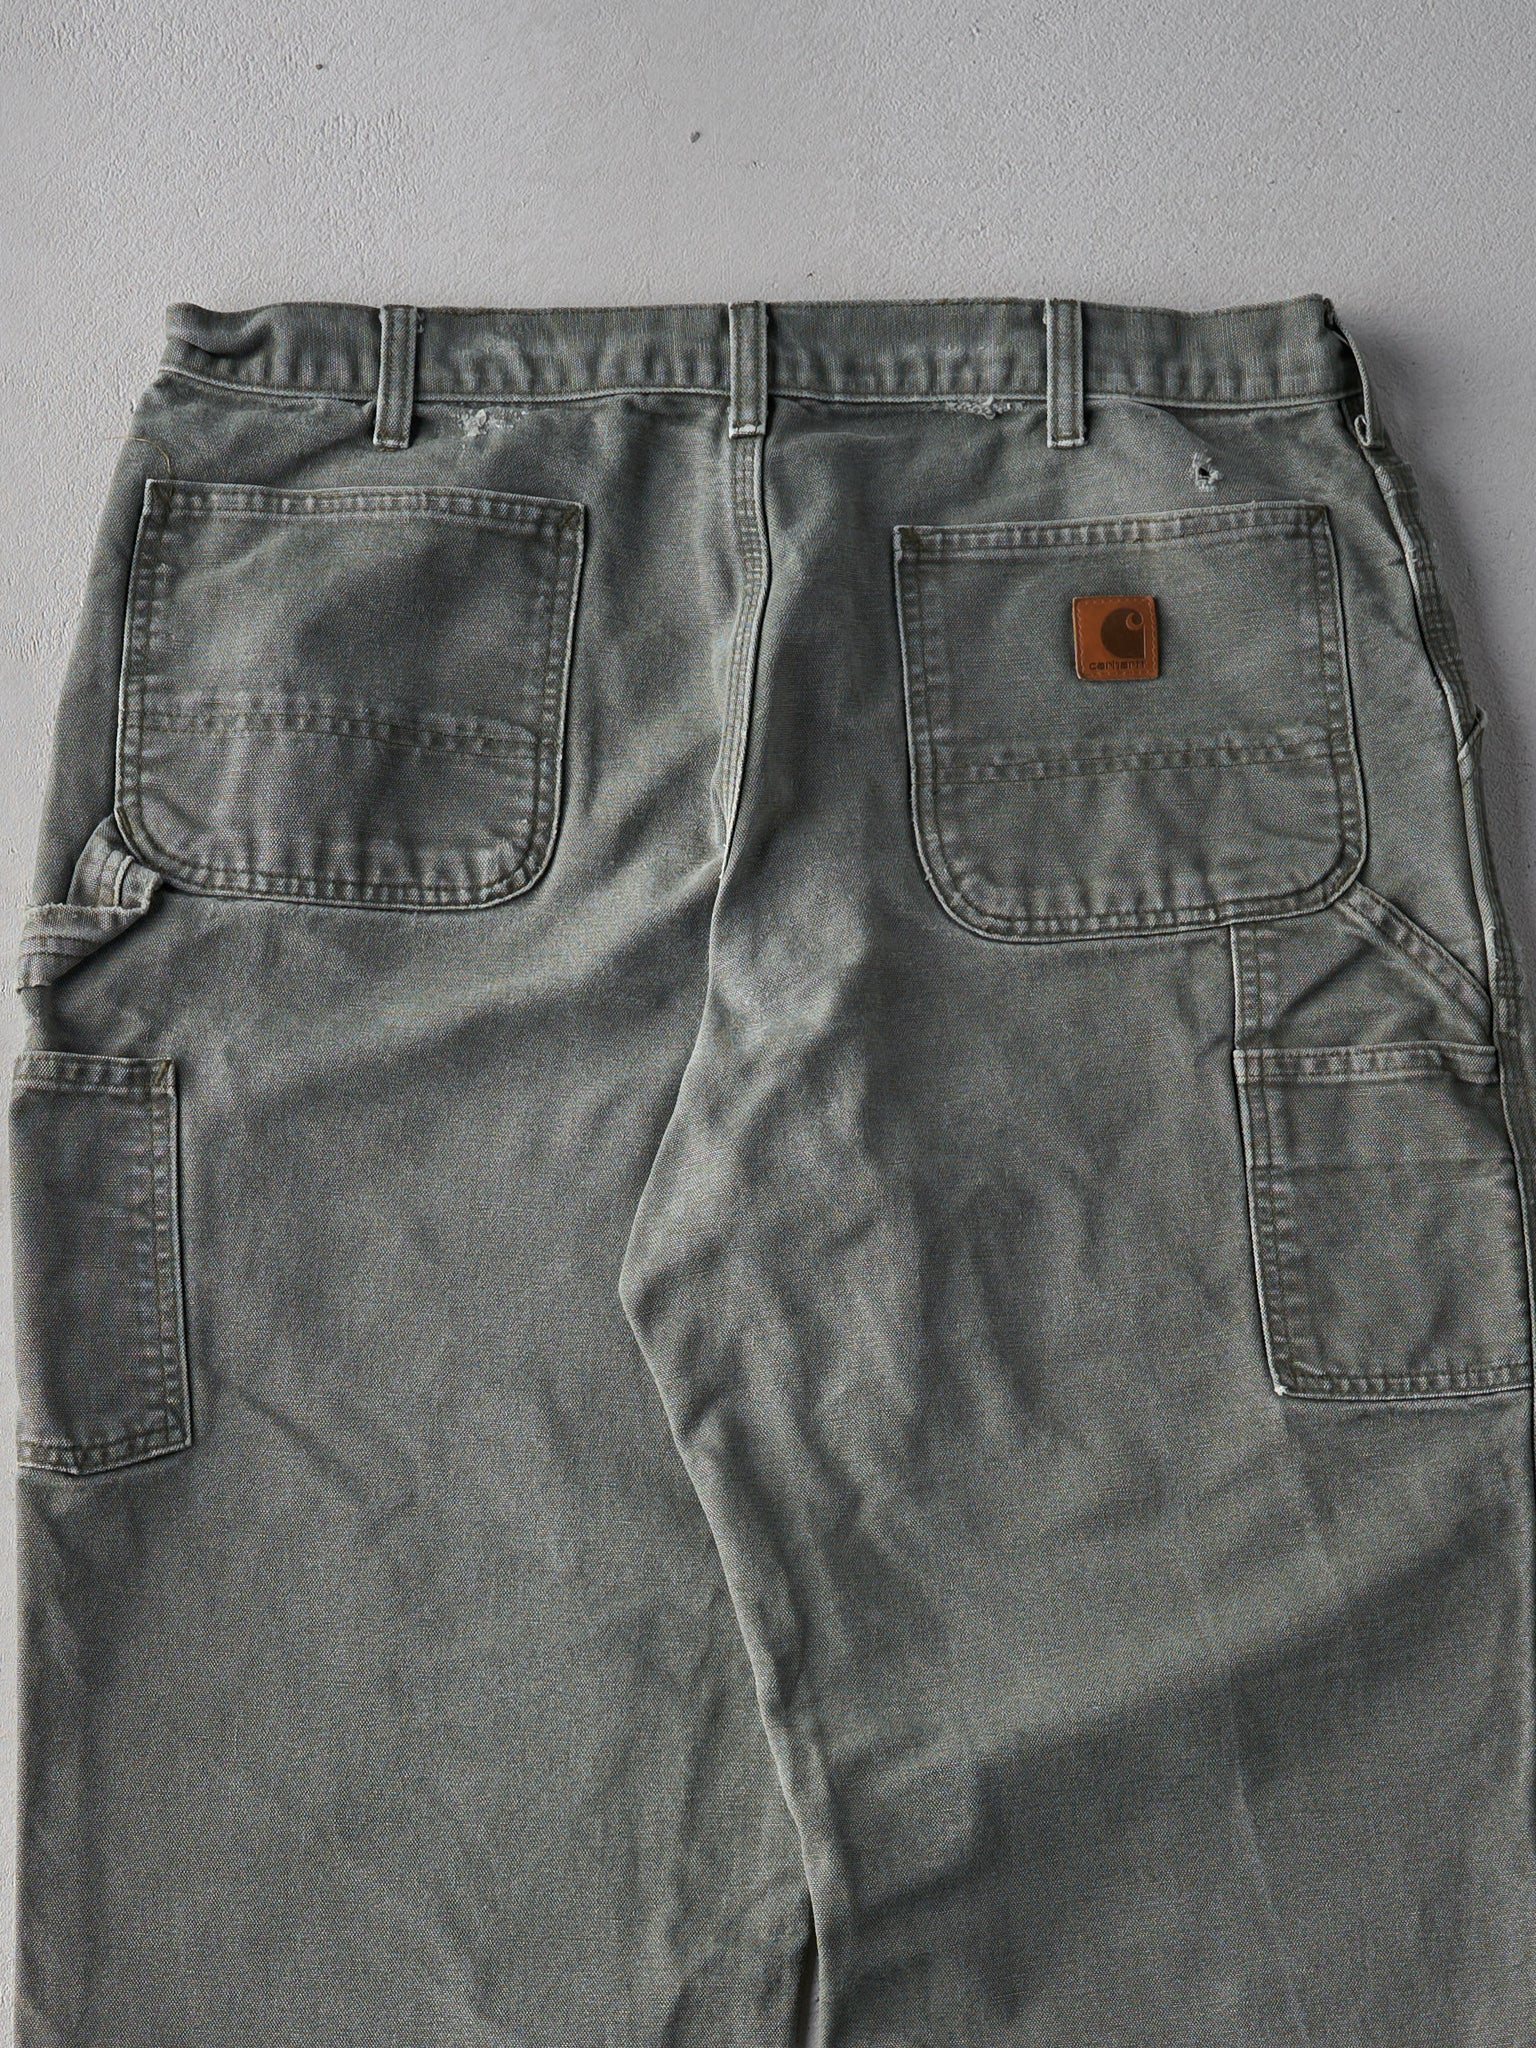 Vintage Y2K Faded Olive Green Dungaree Fit Carhartt Carpenter Pants (36x28)